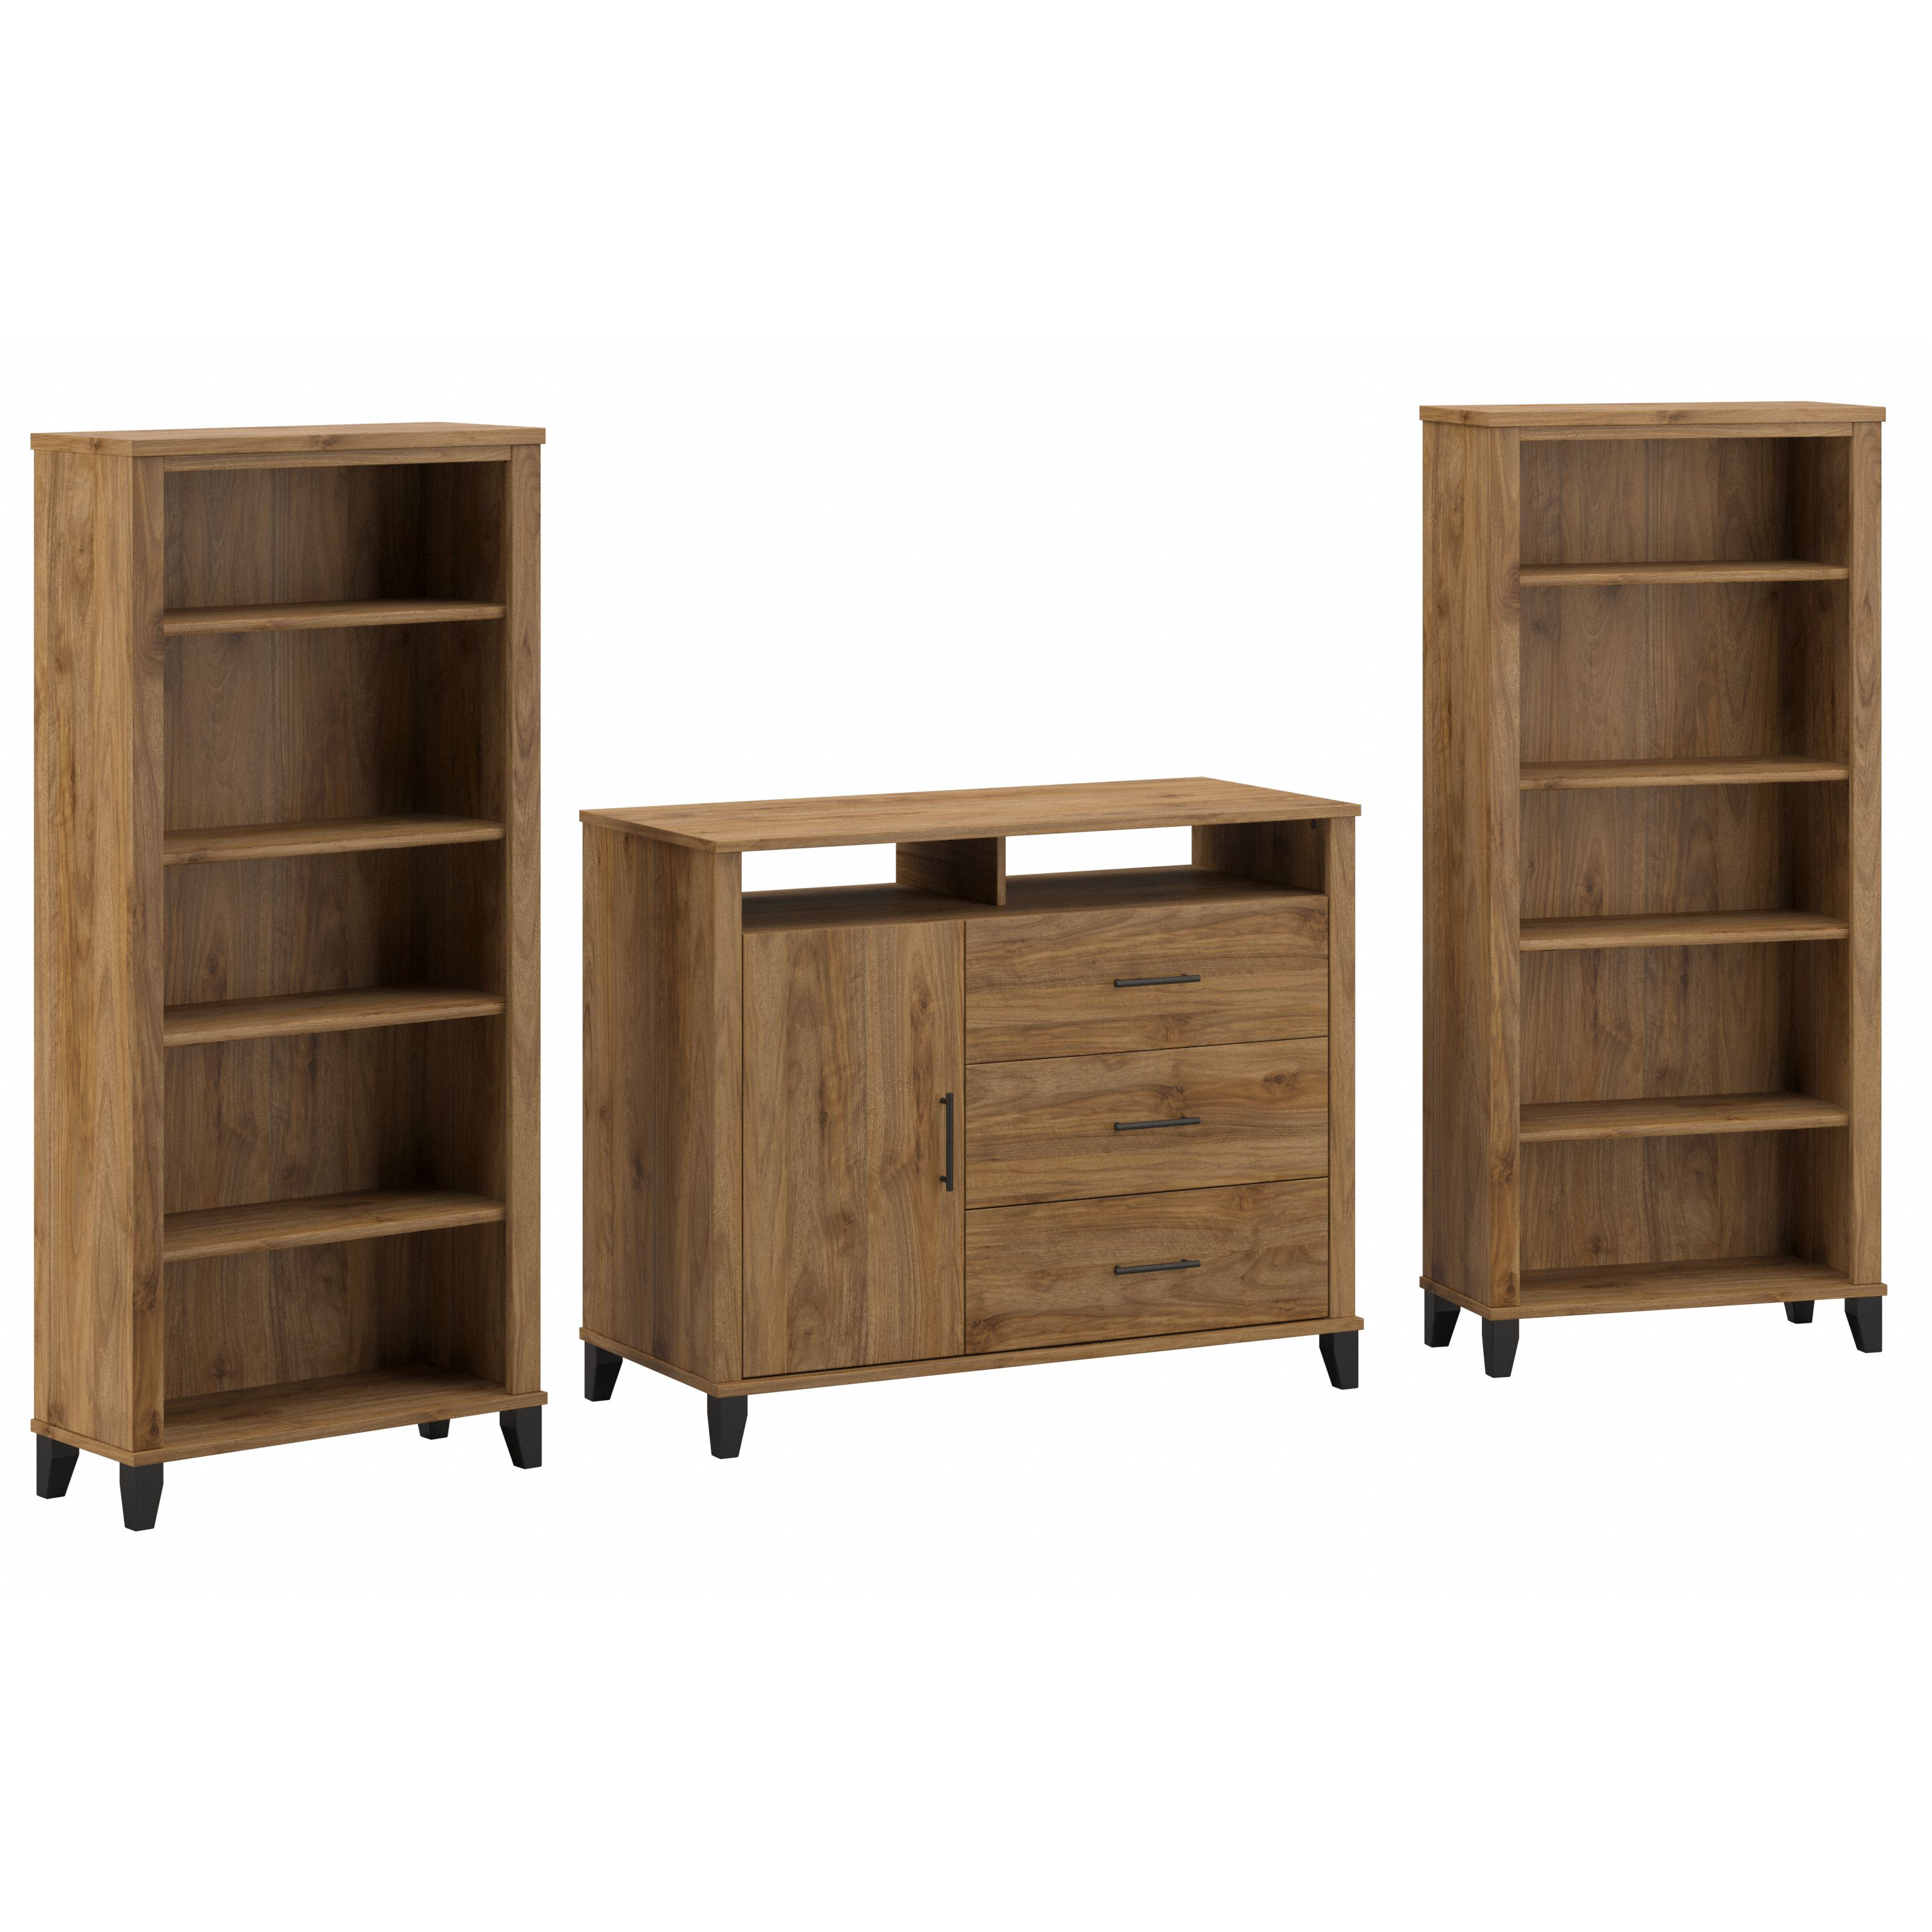 Shop Bush Furniture Somerset Office Storage Credenza with Bookcases 02 SET040FW #color_fresh walnut